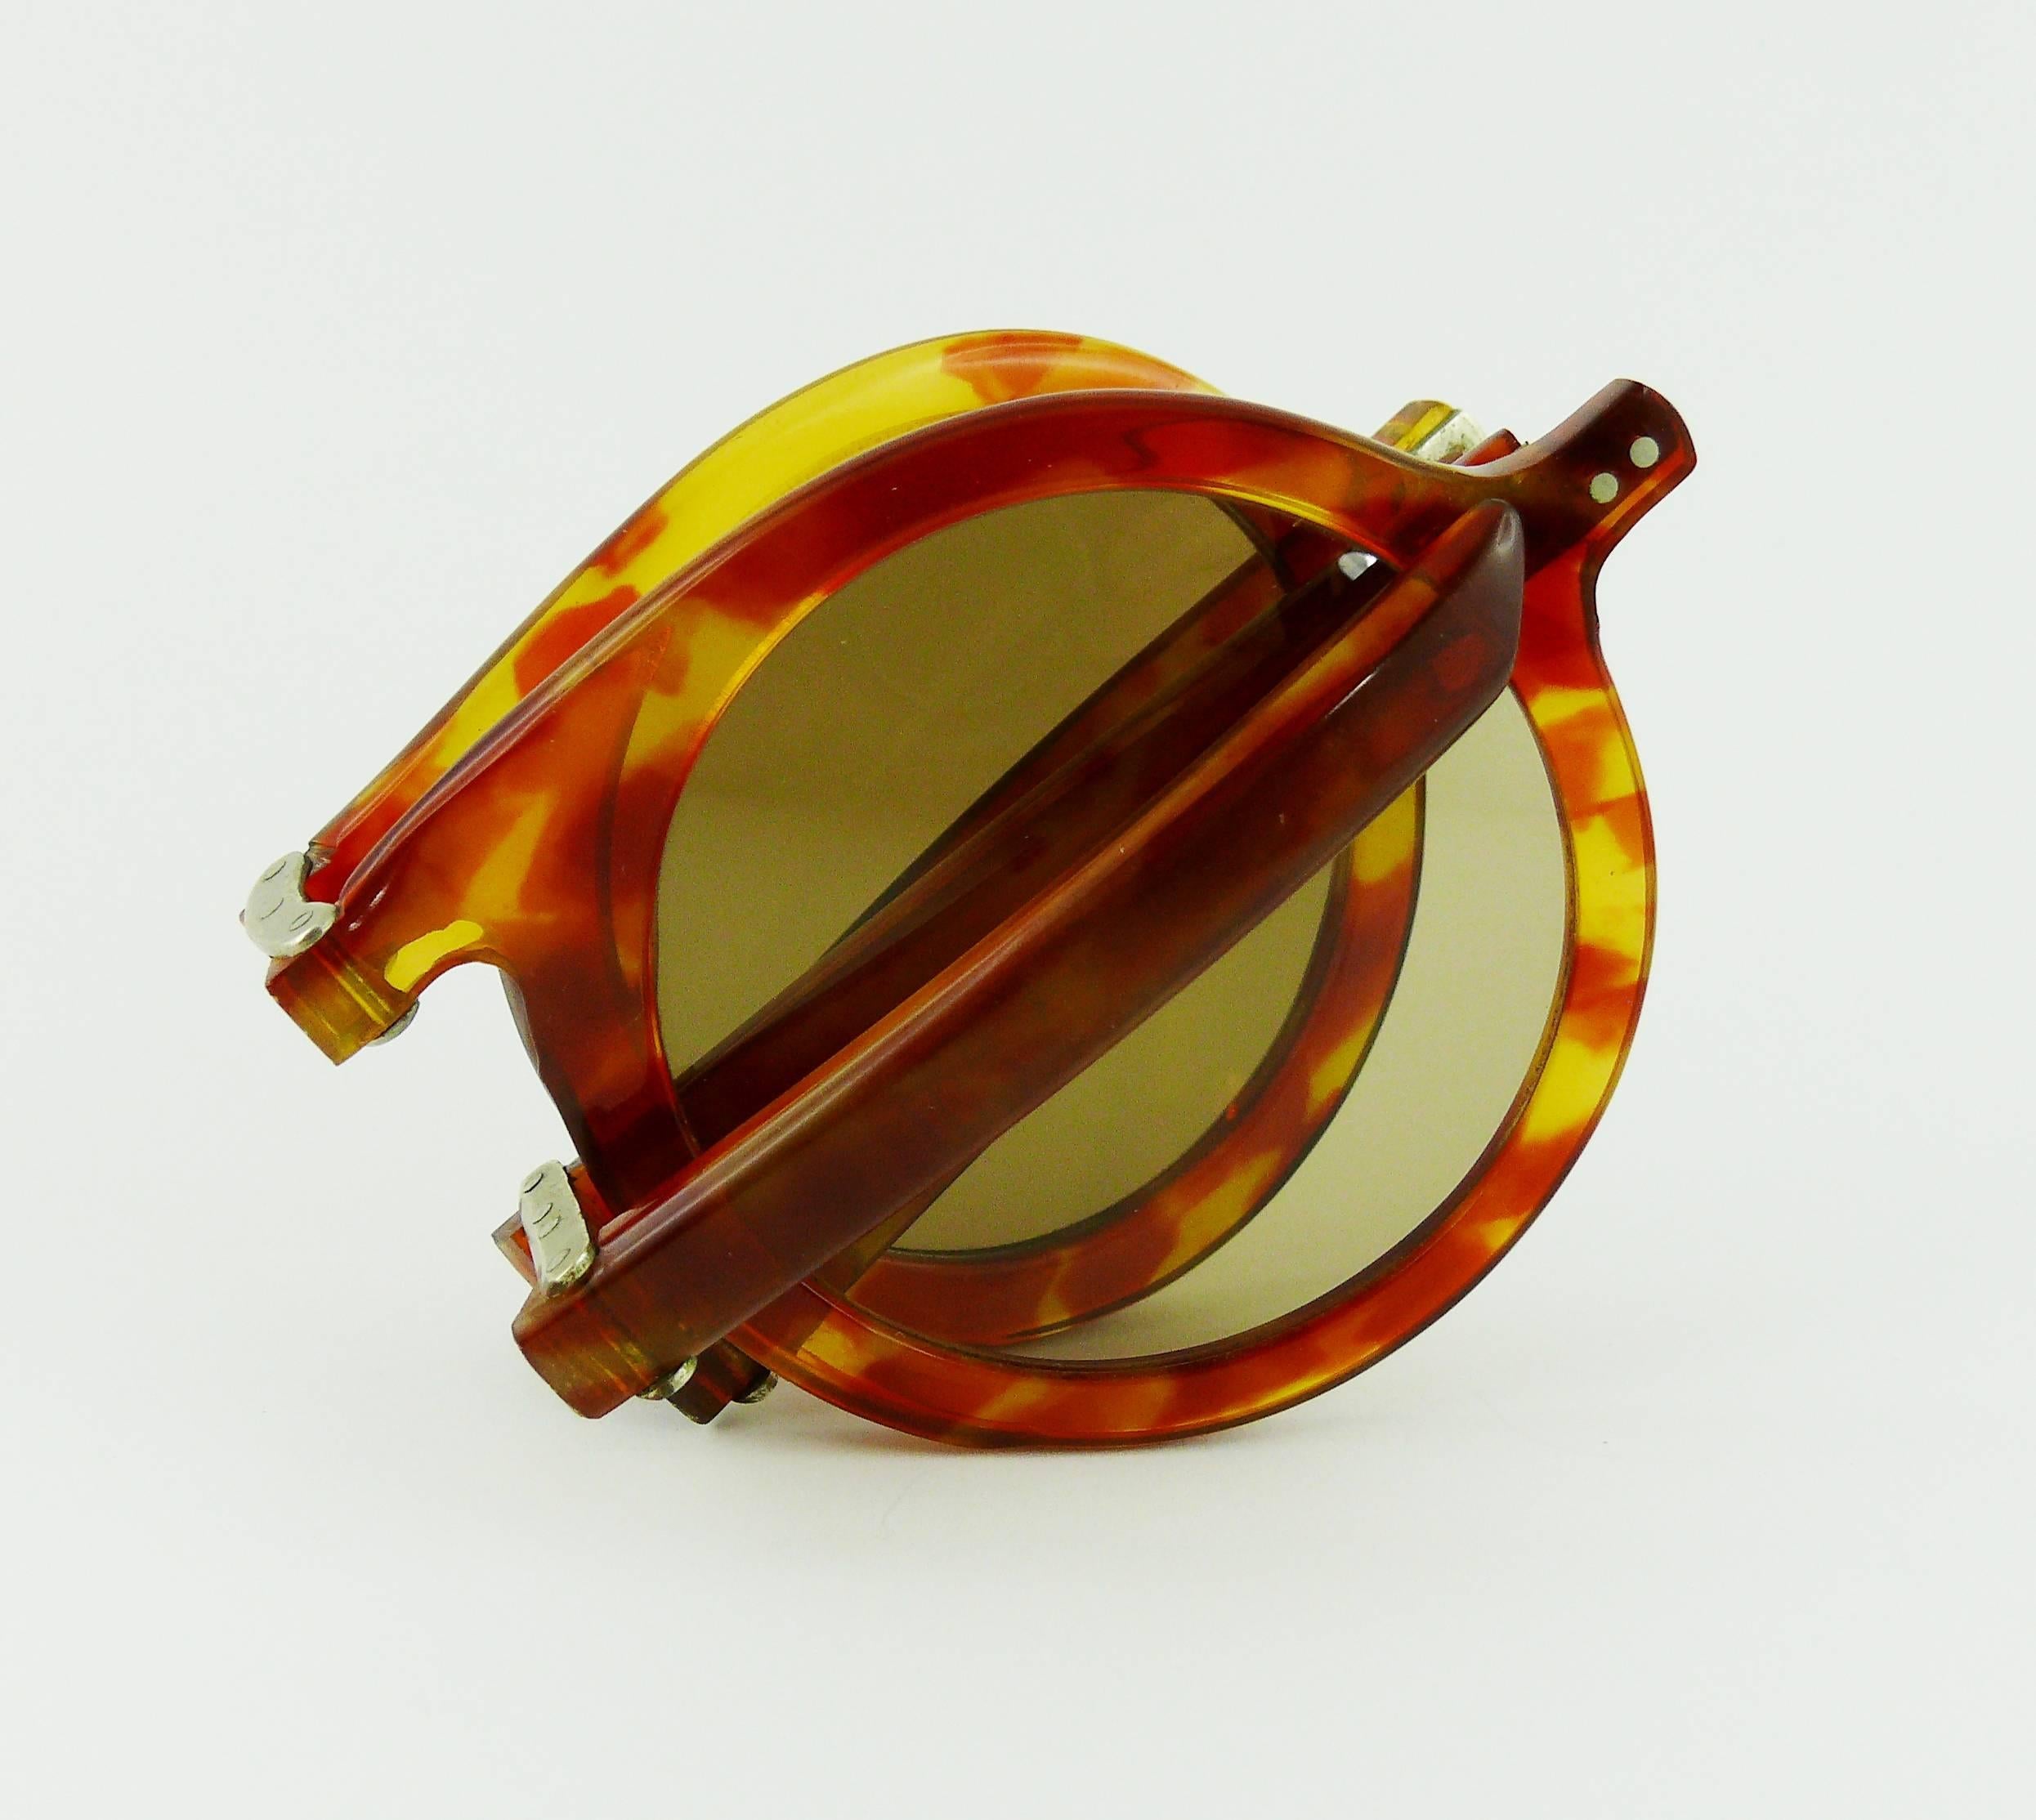 **** WE NO LONGER SHIP SUNGLASSES TO THE USA ****

PIERRE CARDIN rare vintage oversized folding sunglasses

Engraved PIERRE CARDIN on the inside temple.

CONDITION REPORT
- Frames
Superficial scratches throughout.
Minor usual wear/oxidation on metal